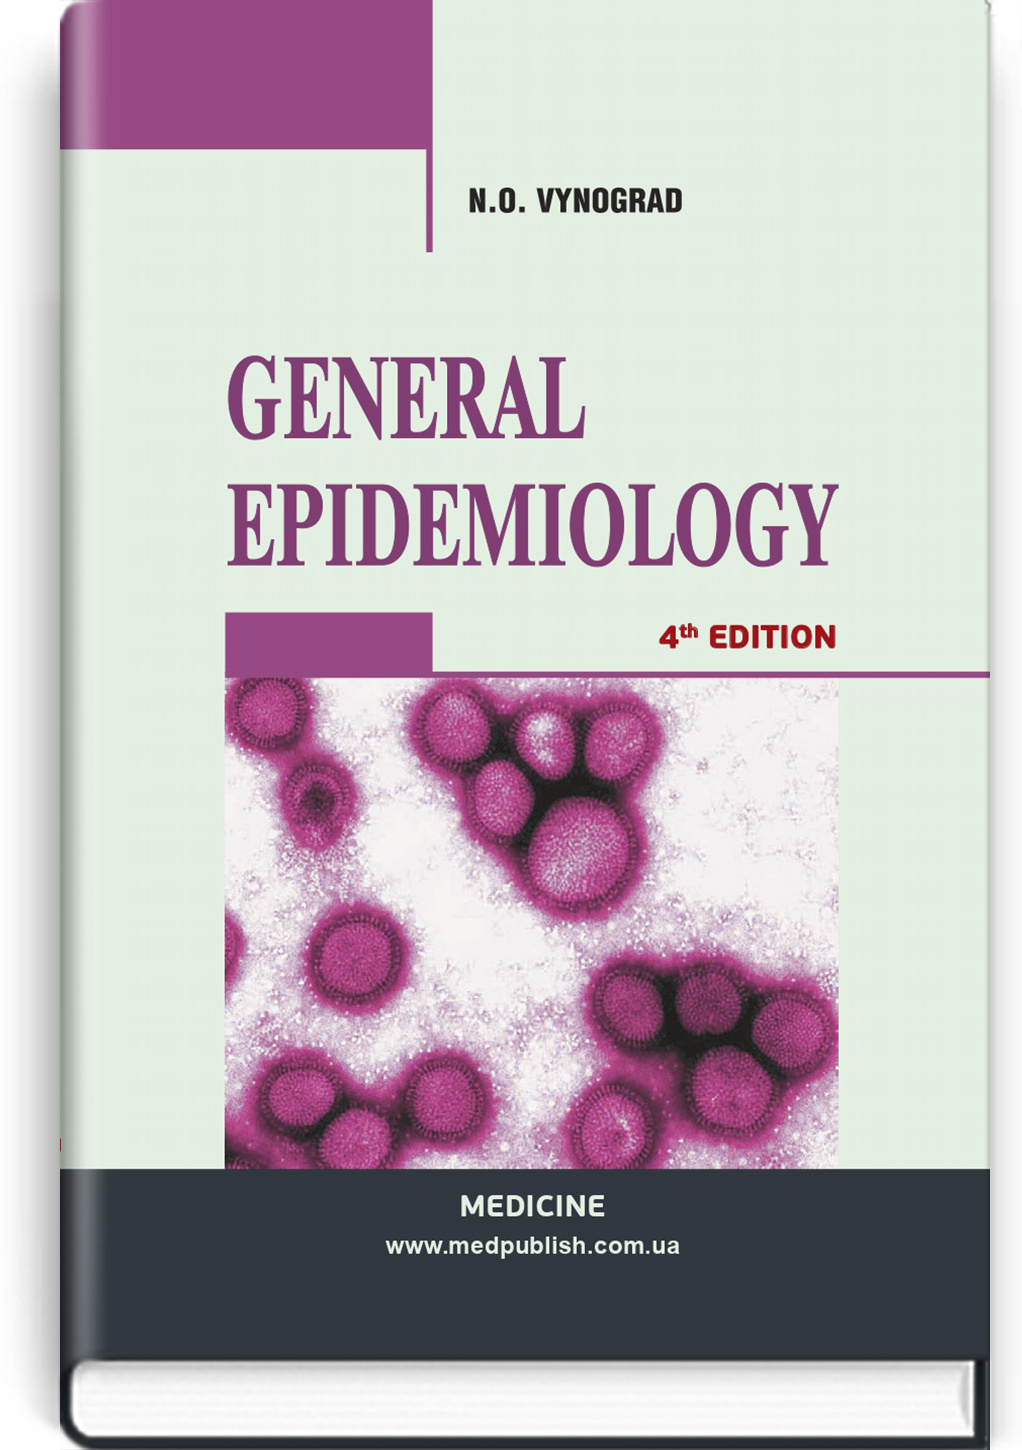 General epidemiology: study guide